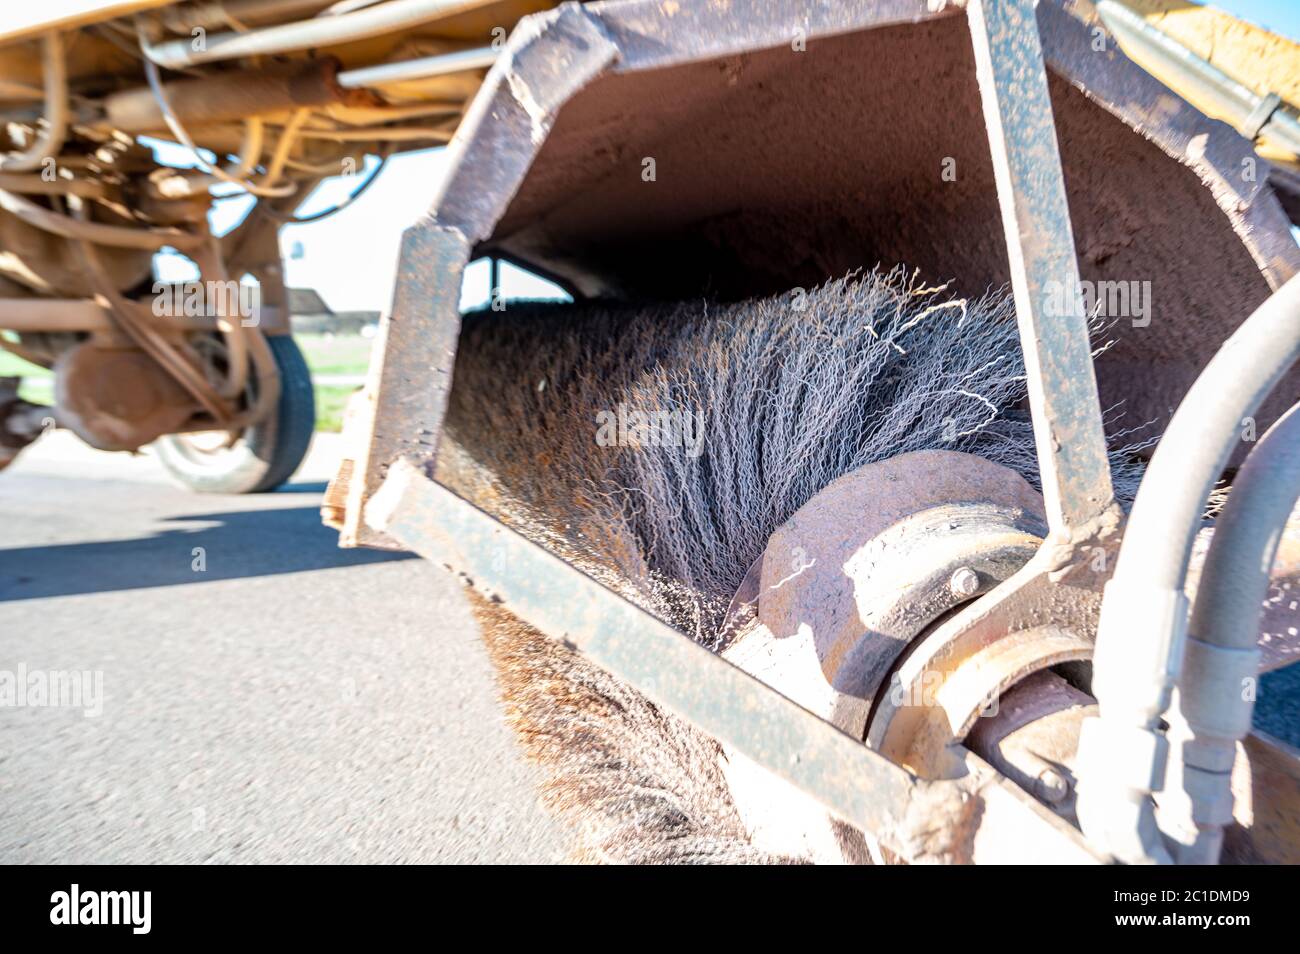 Street sweeper used in construction cleanup activity to remove dirts from paved surfaces Stock Photo